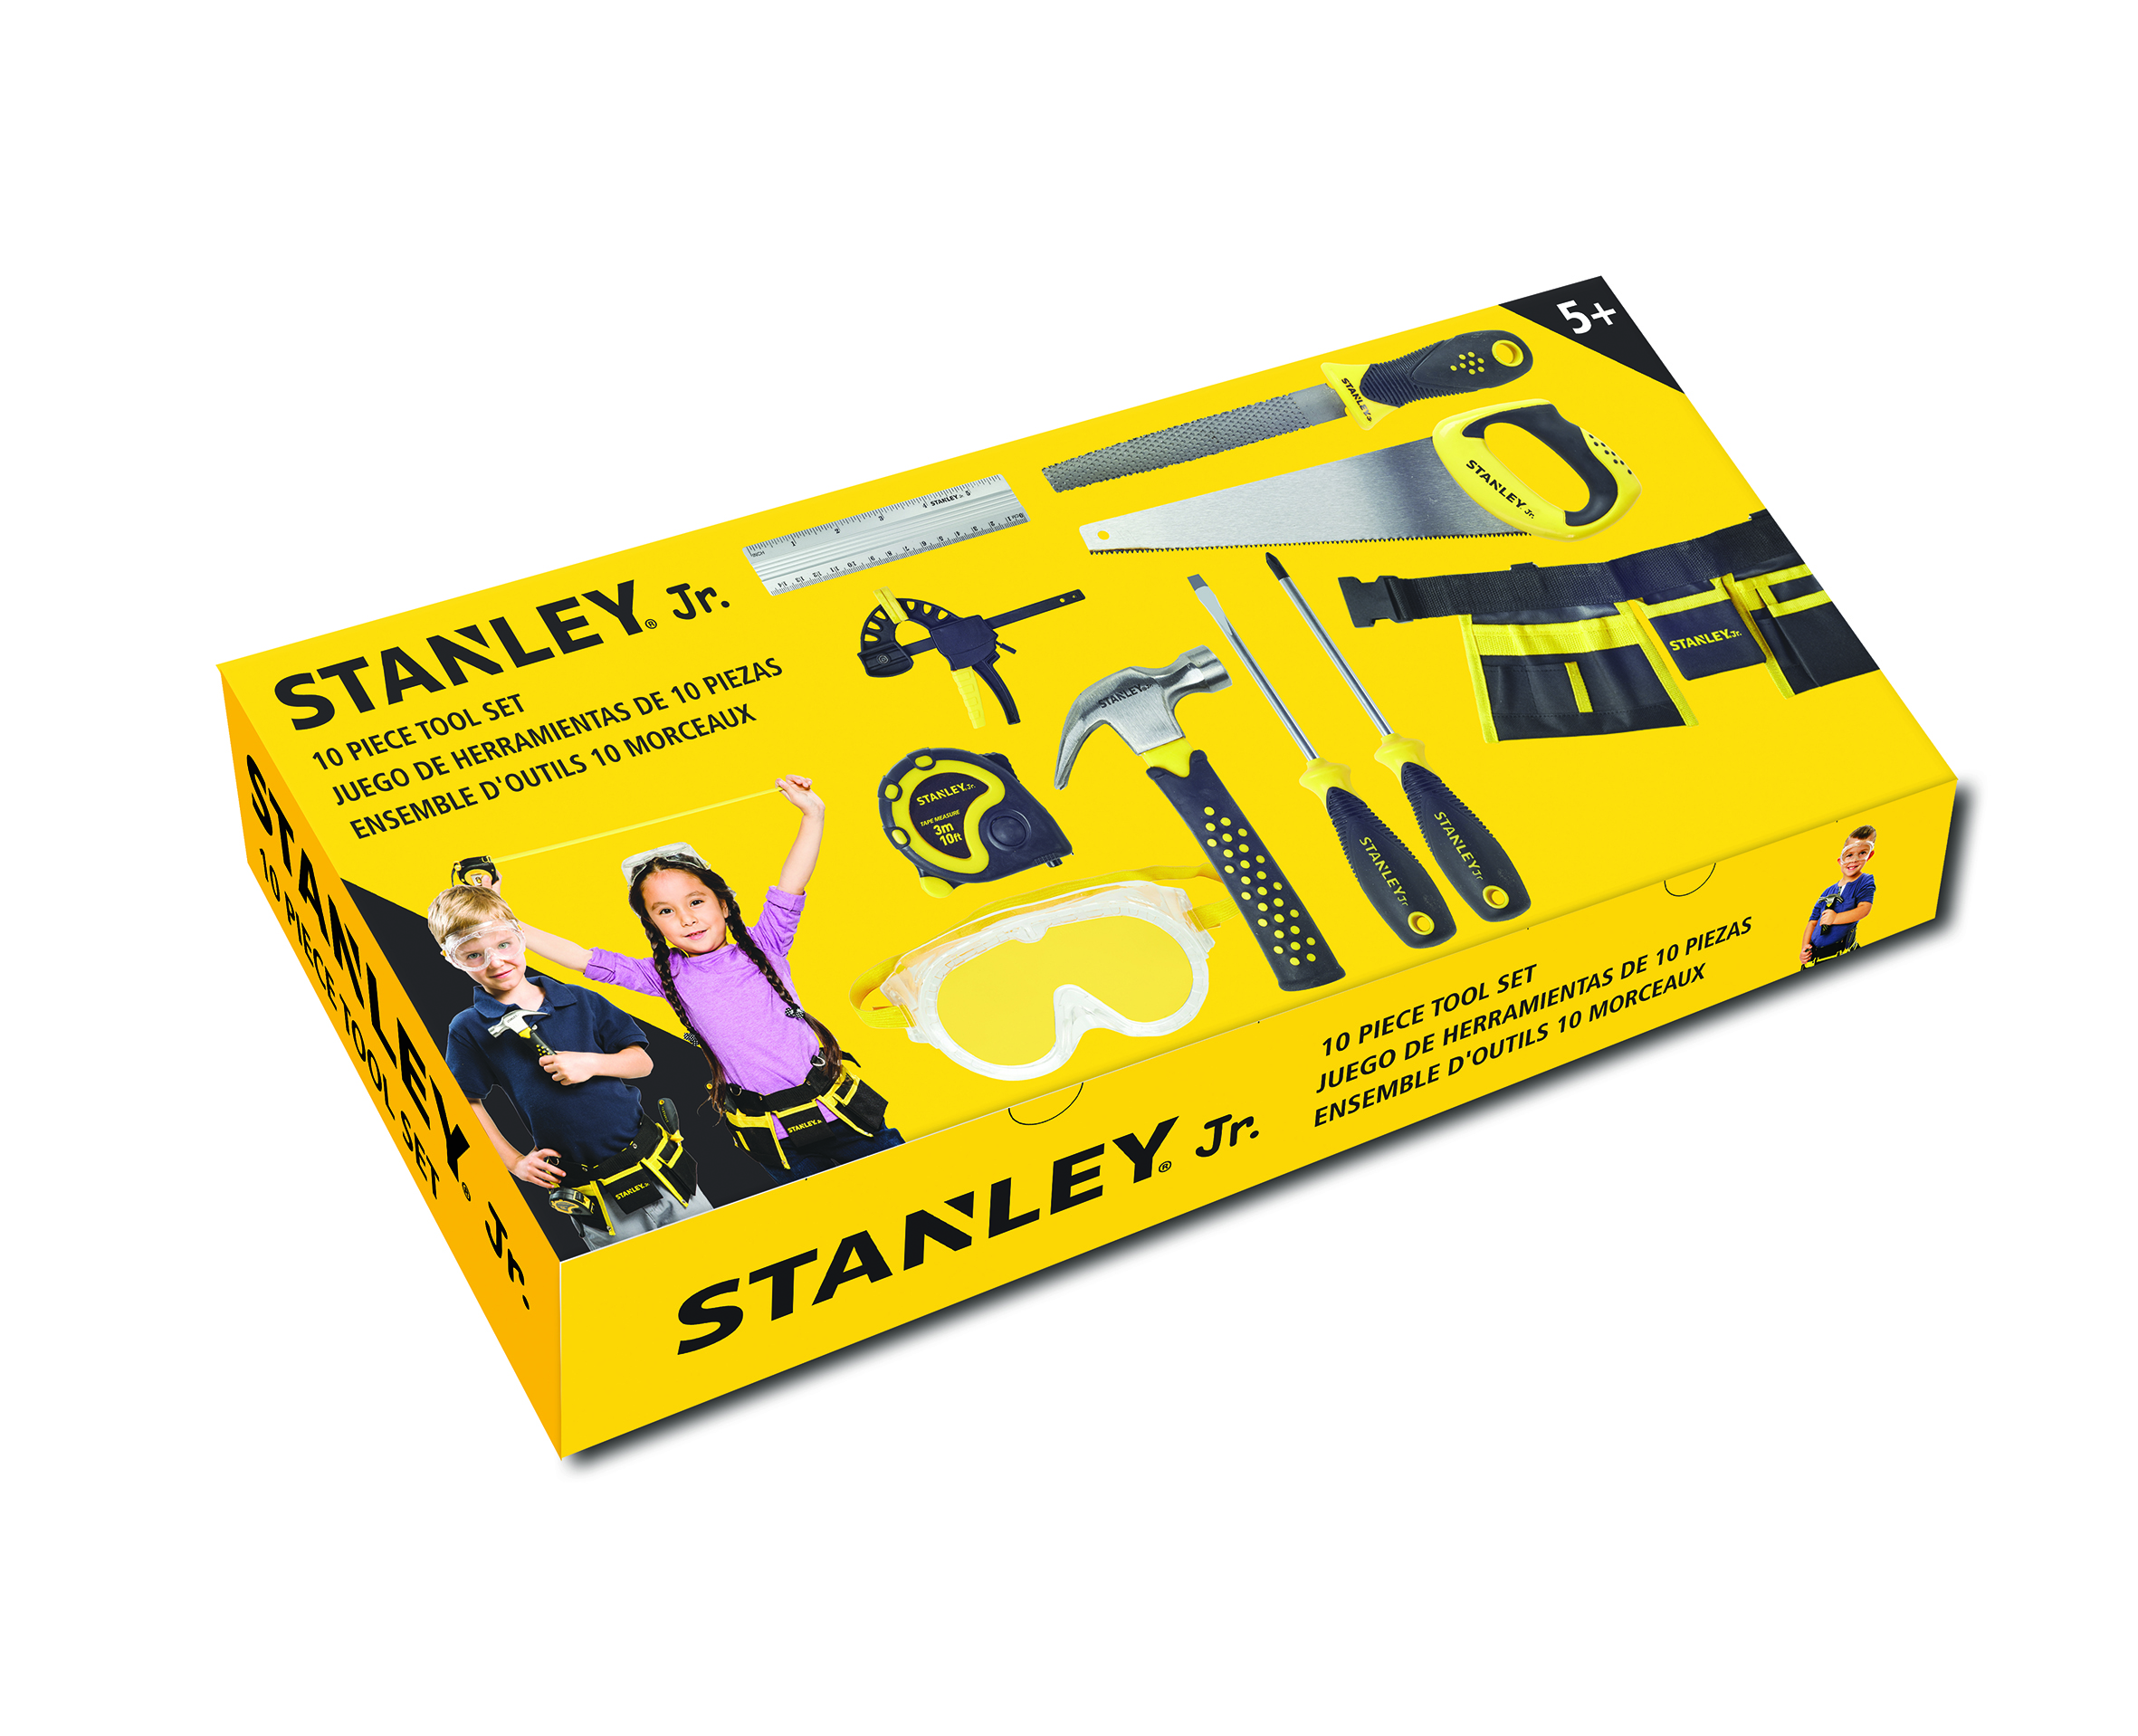 10 PC Toolset Stanley Jr. - RED TOOL BOX